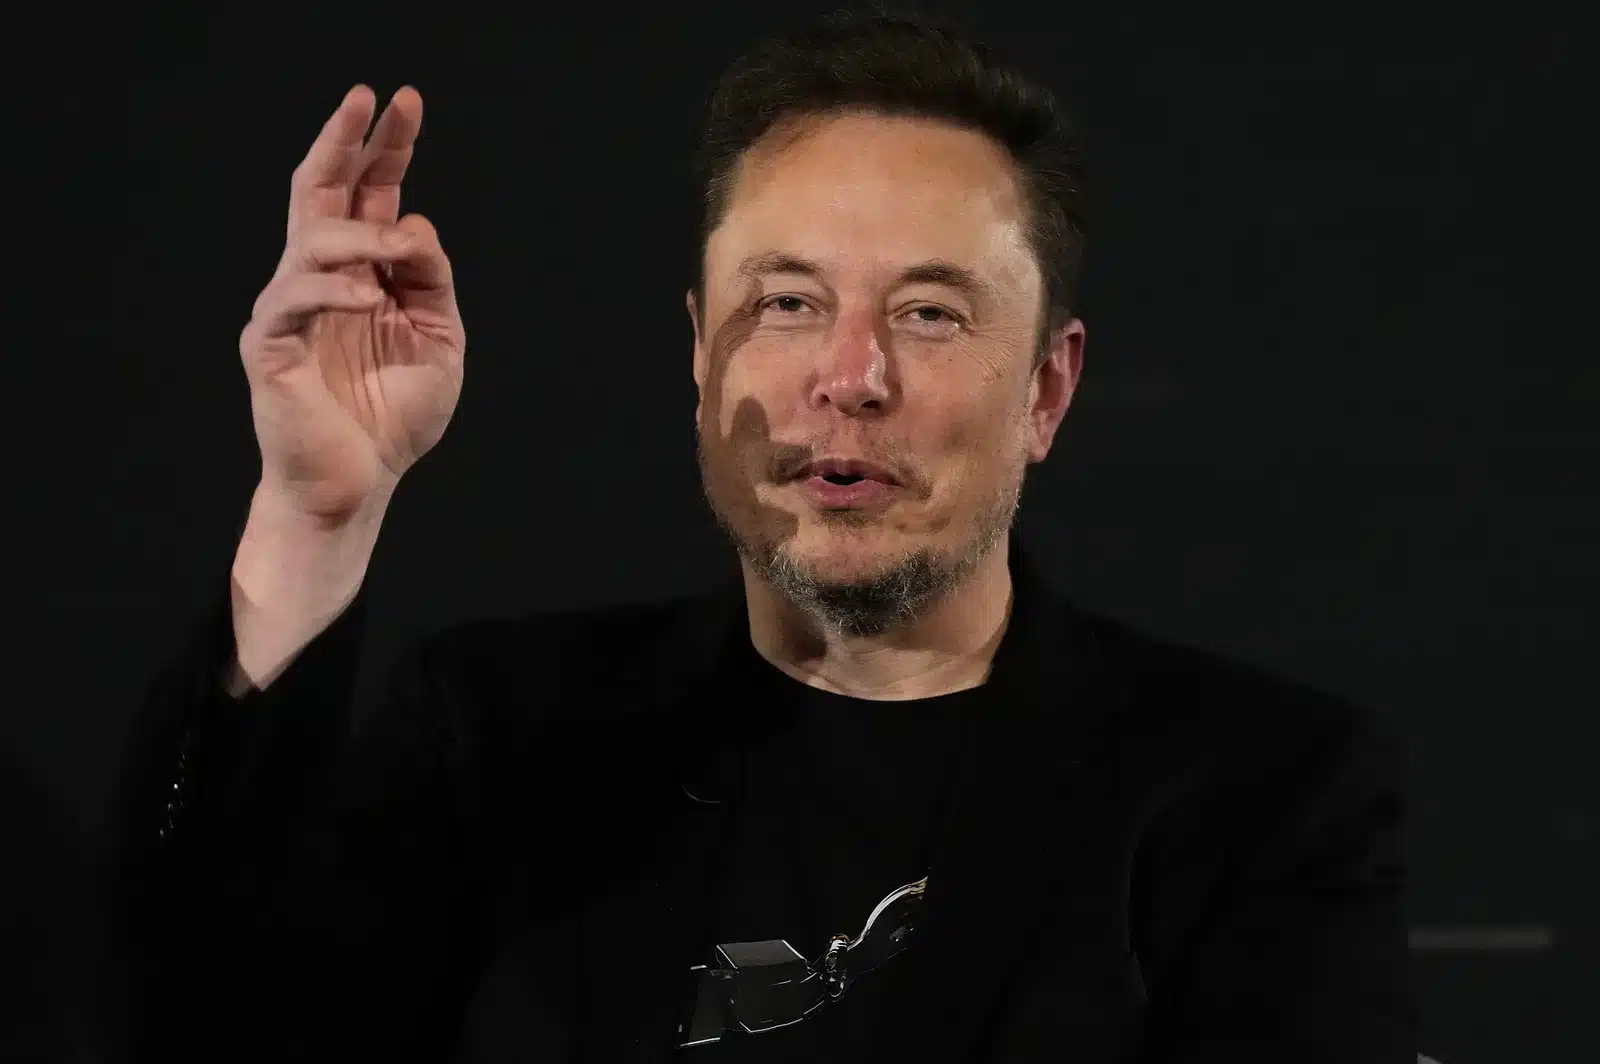 Advertiser Exodus Grows as Elon Musk’s X Struggles to Calm Concerns Over Antisemitism